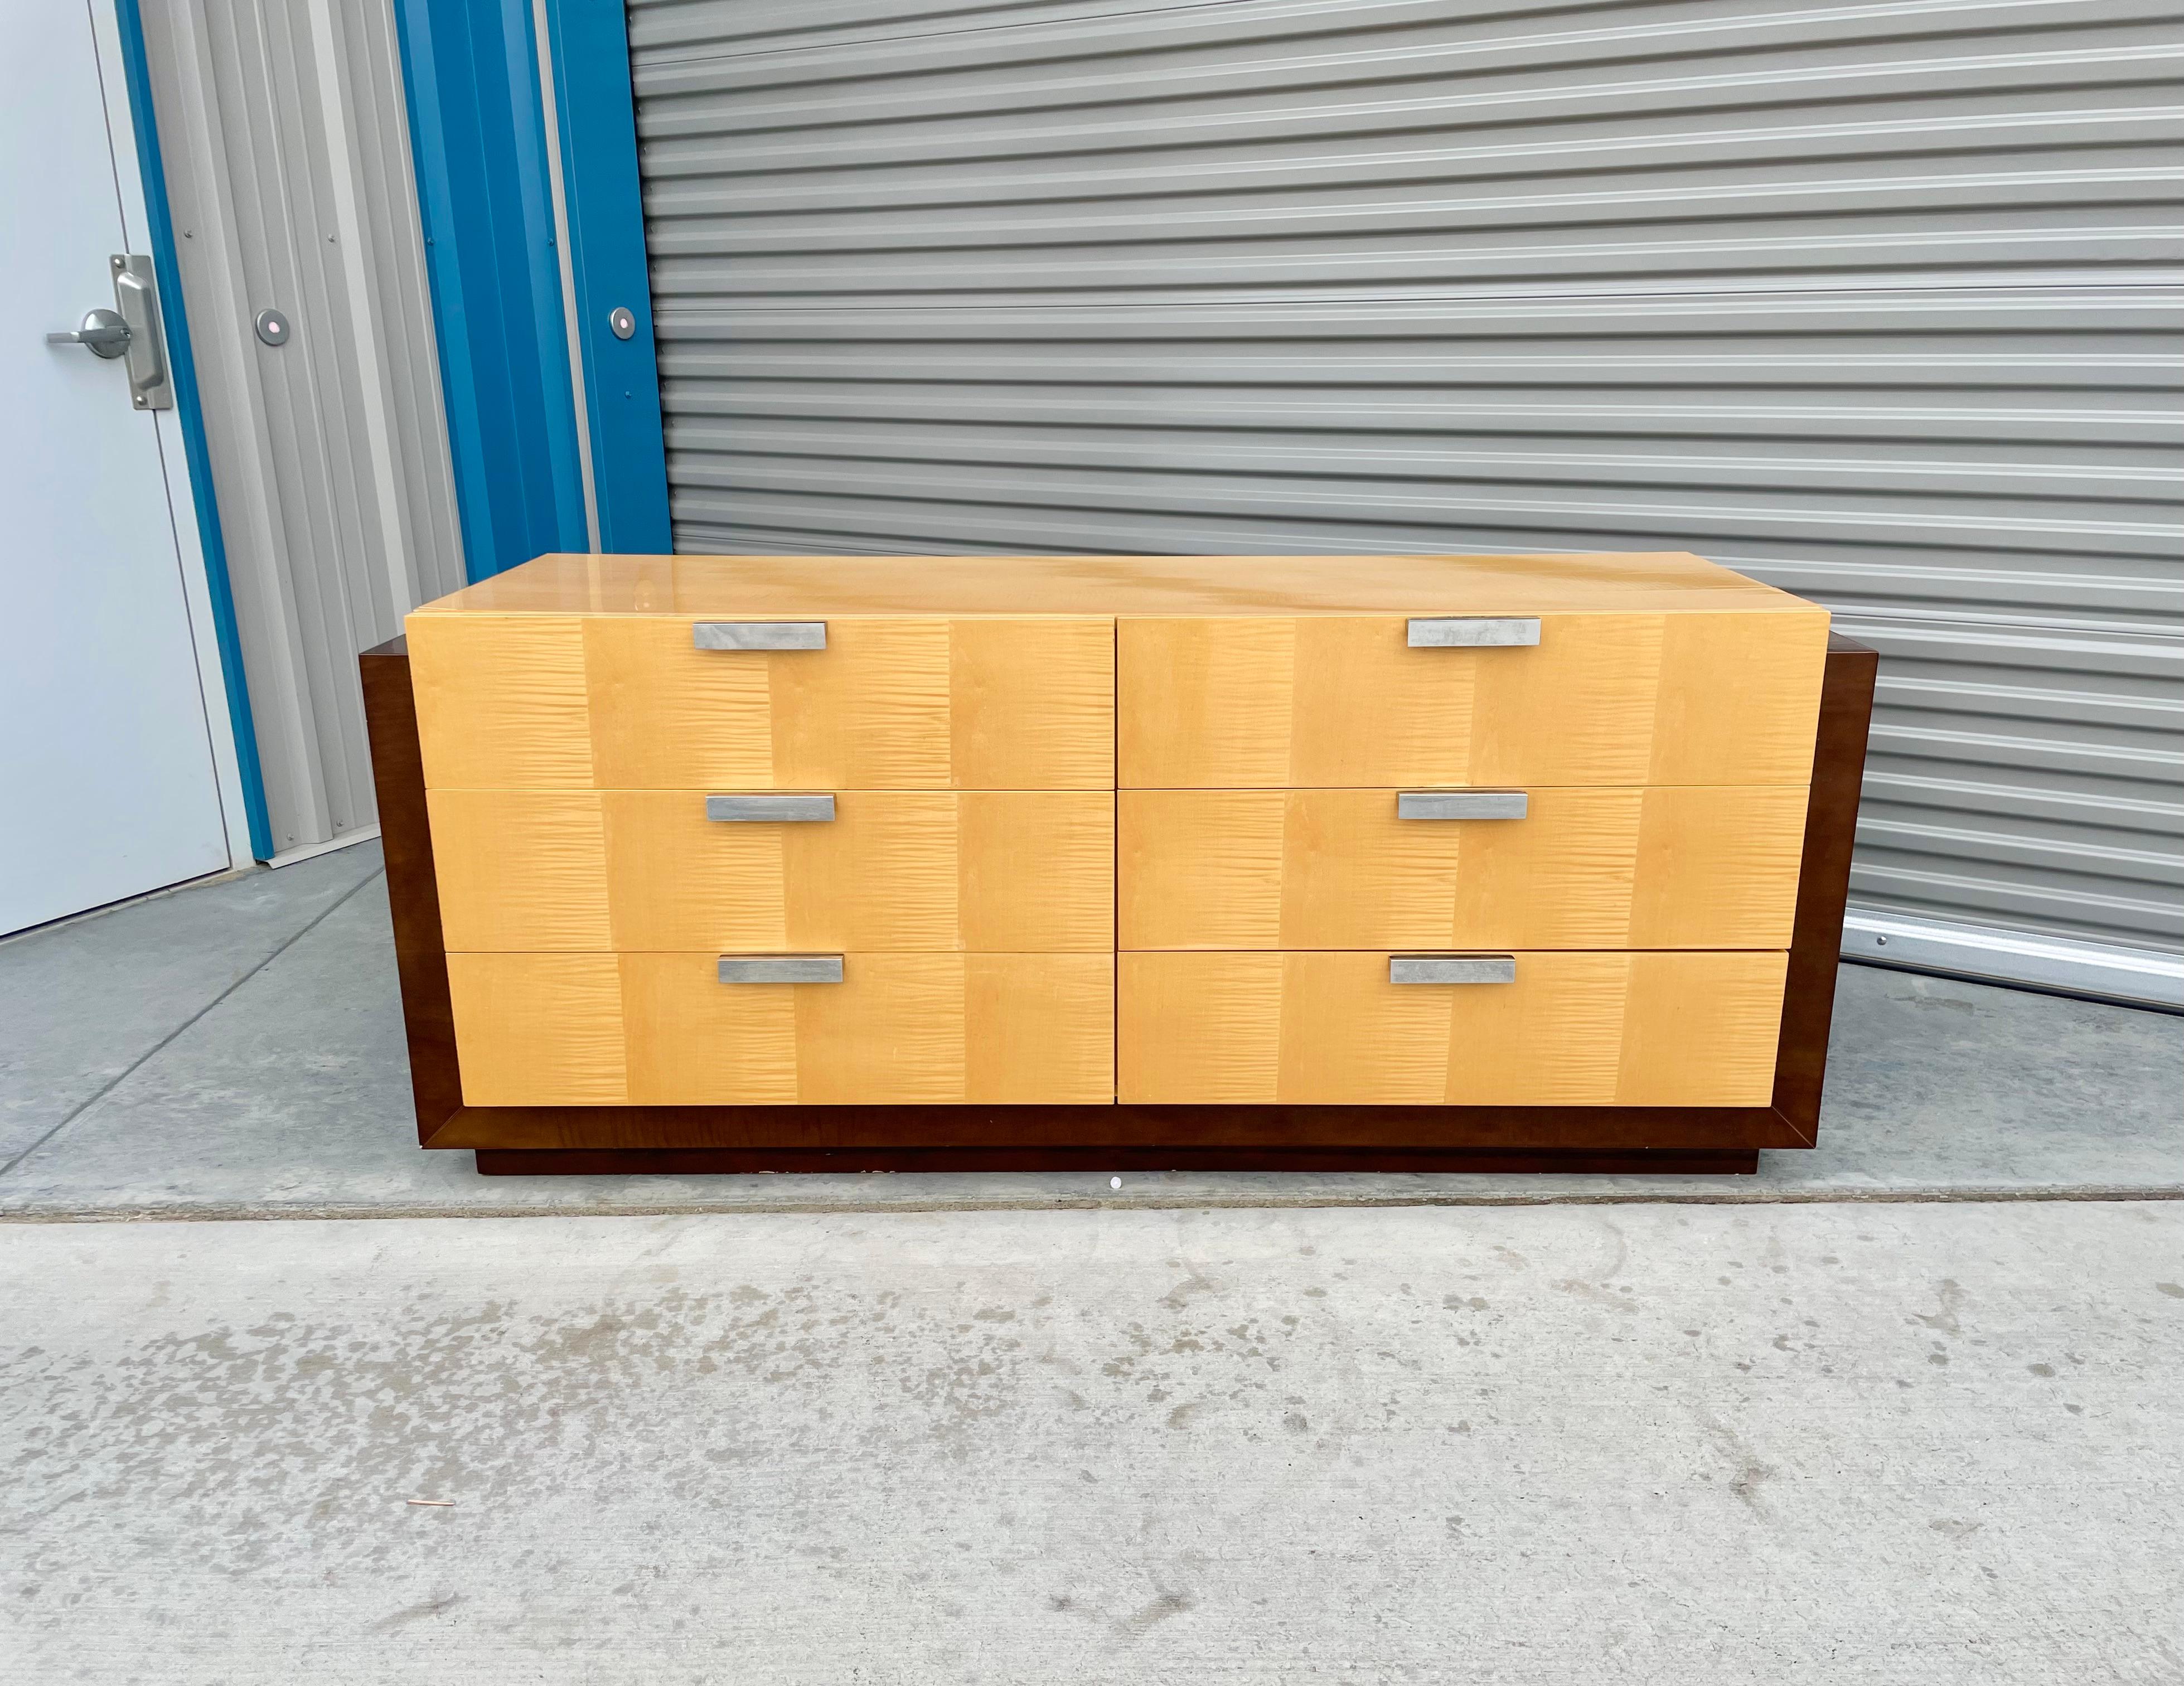 Mid-century maple and walnut dresser was designed and manufactured in the United States circa 1970s. This stunning dresser features a maple wood frame with six pull-out drawers. The dresser sits on top of a walnut base, guaranteed to draw attention